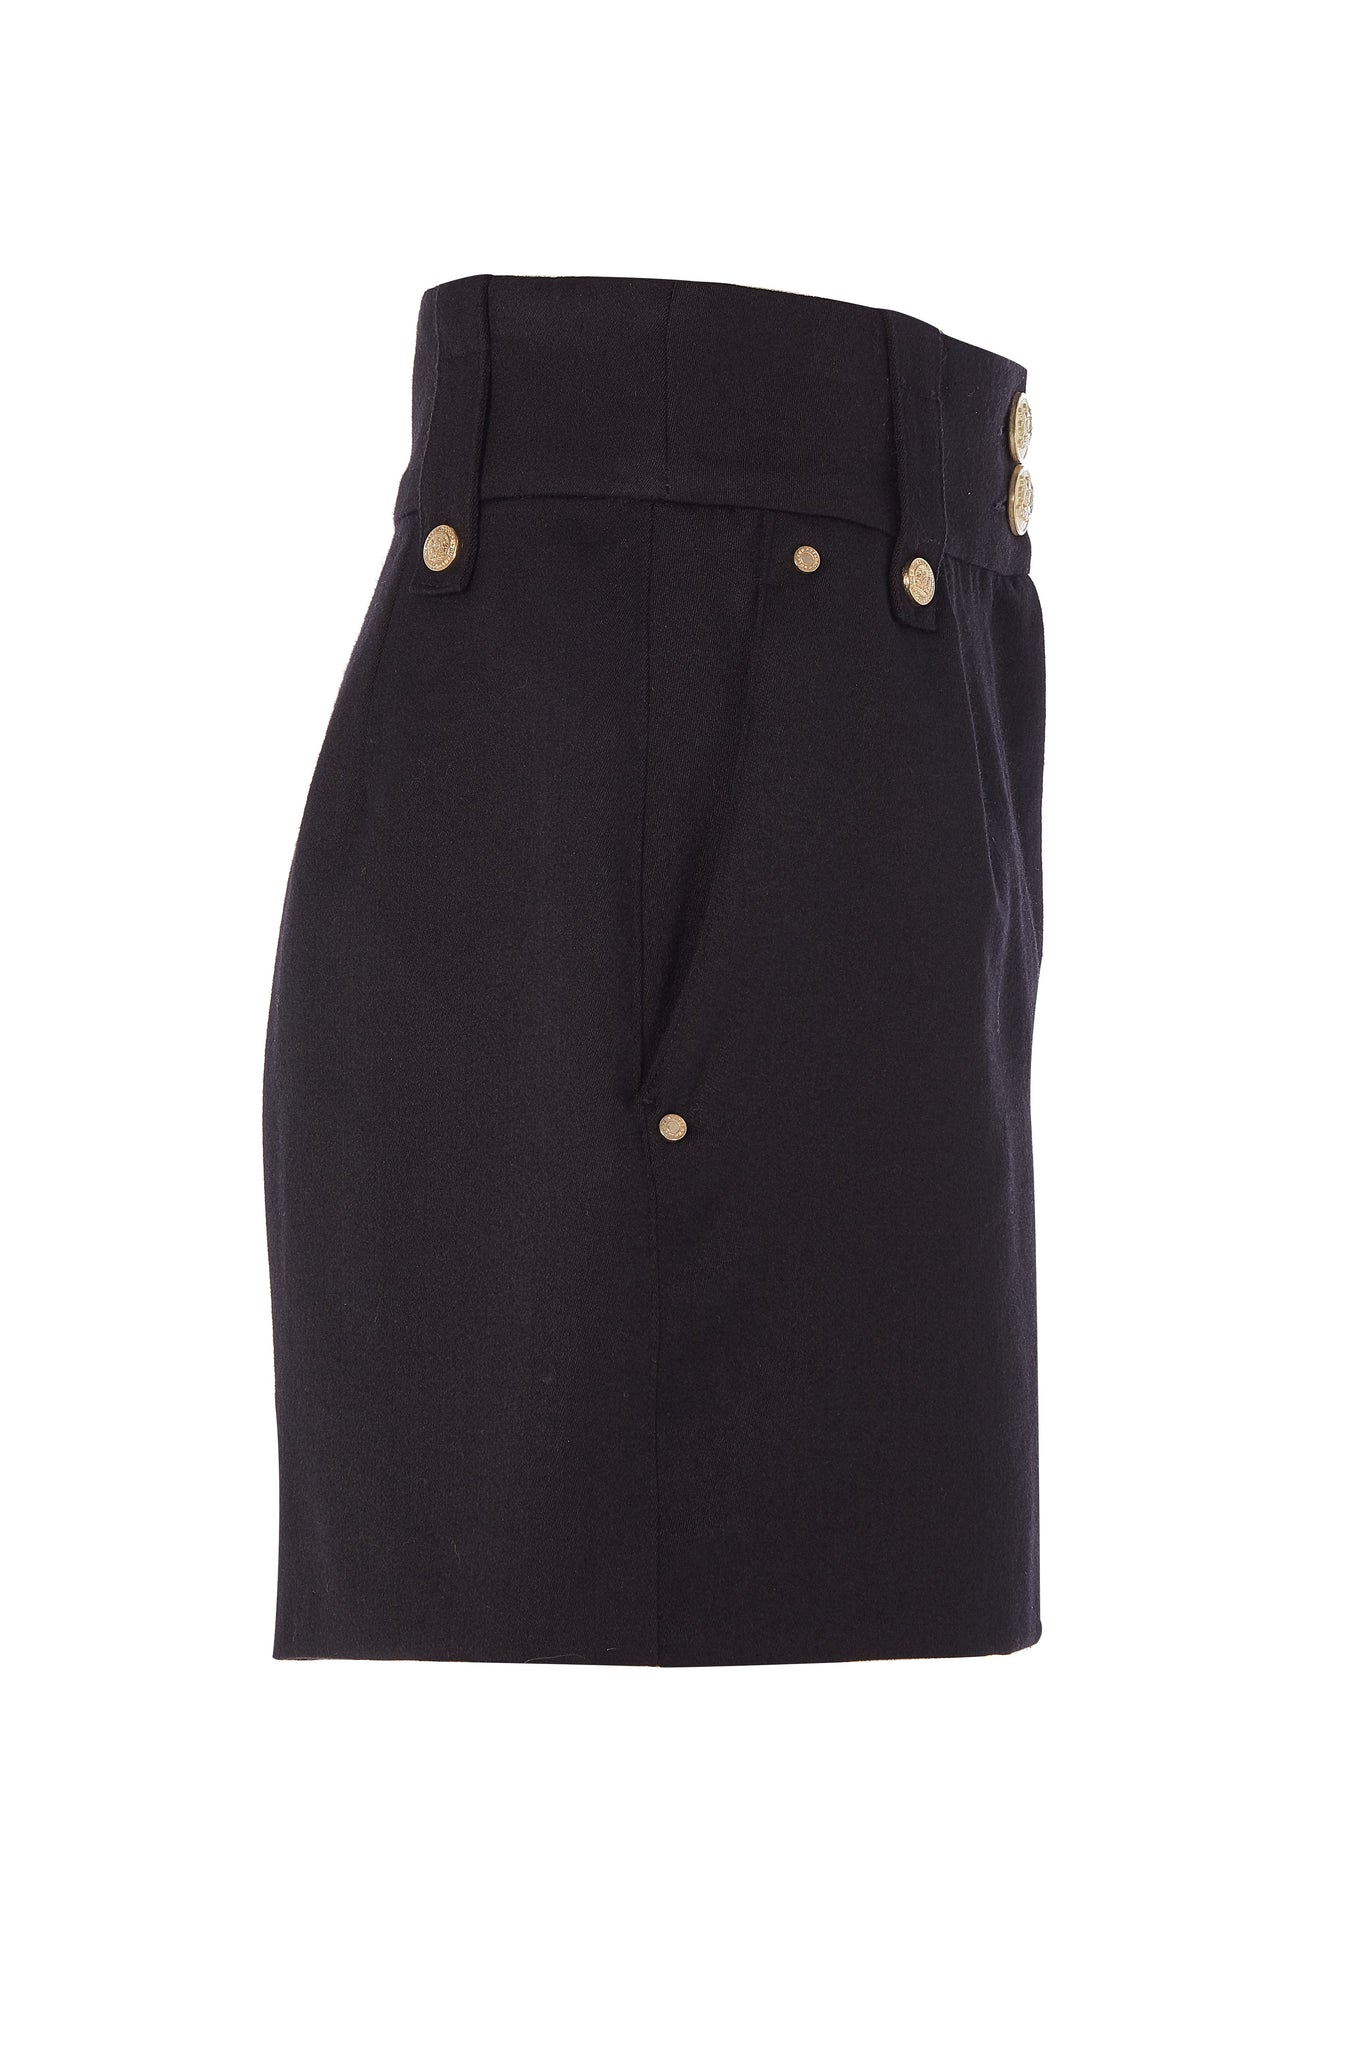 side of womens black high rise tailored shorts with two single knife pleats and centre front zip fly fastening with twin branded gold stud buttons and side hip pockets with branded rivet detailing at top and bottom of pockets